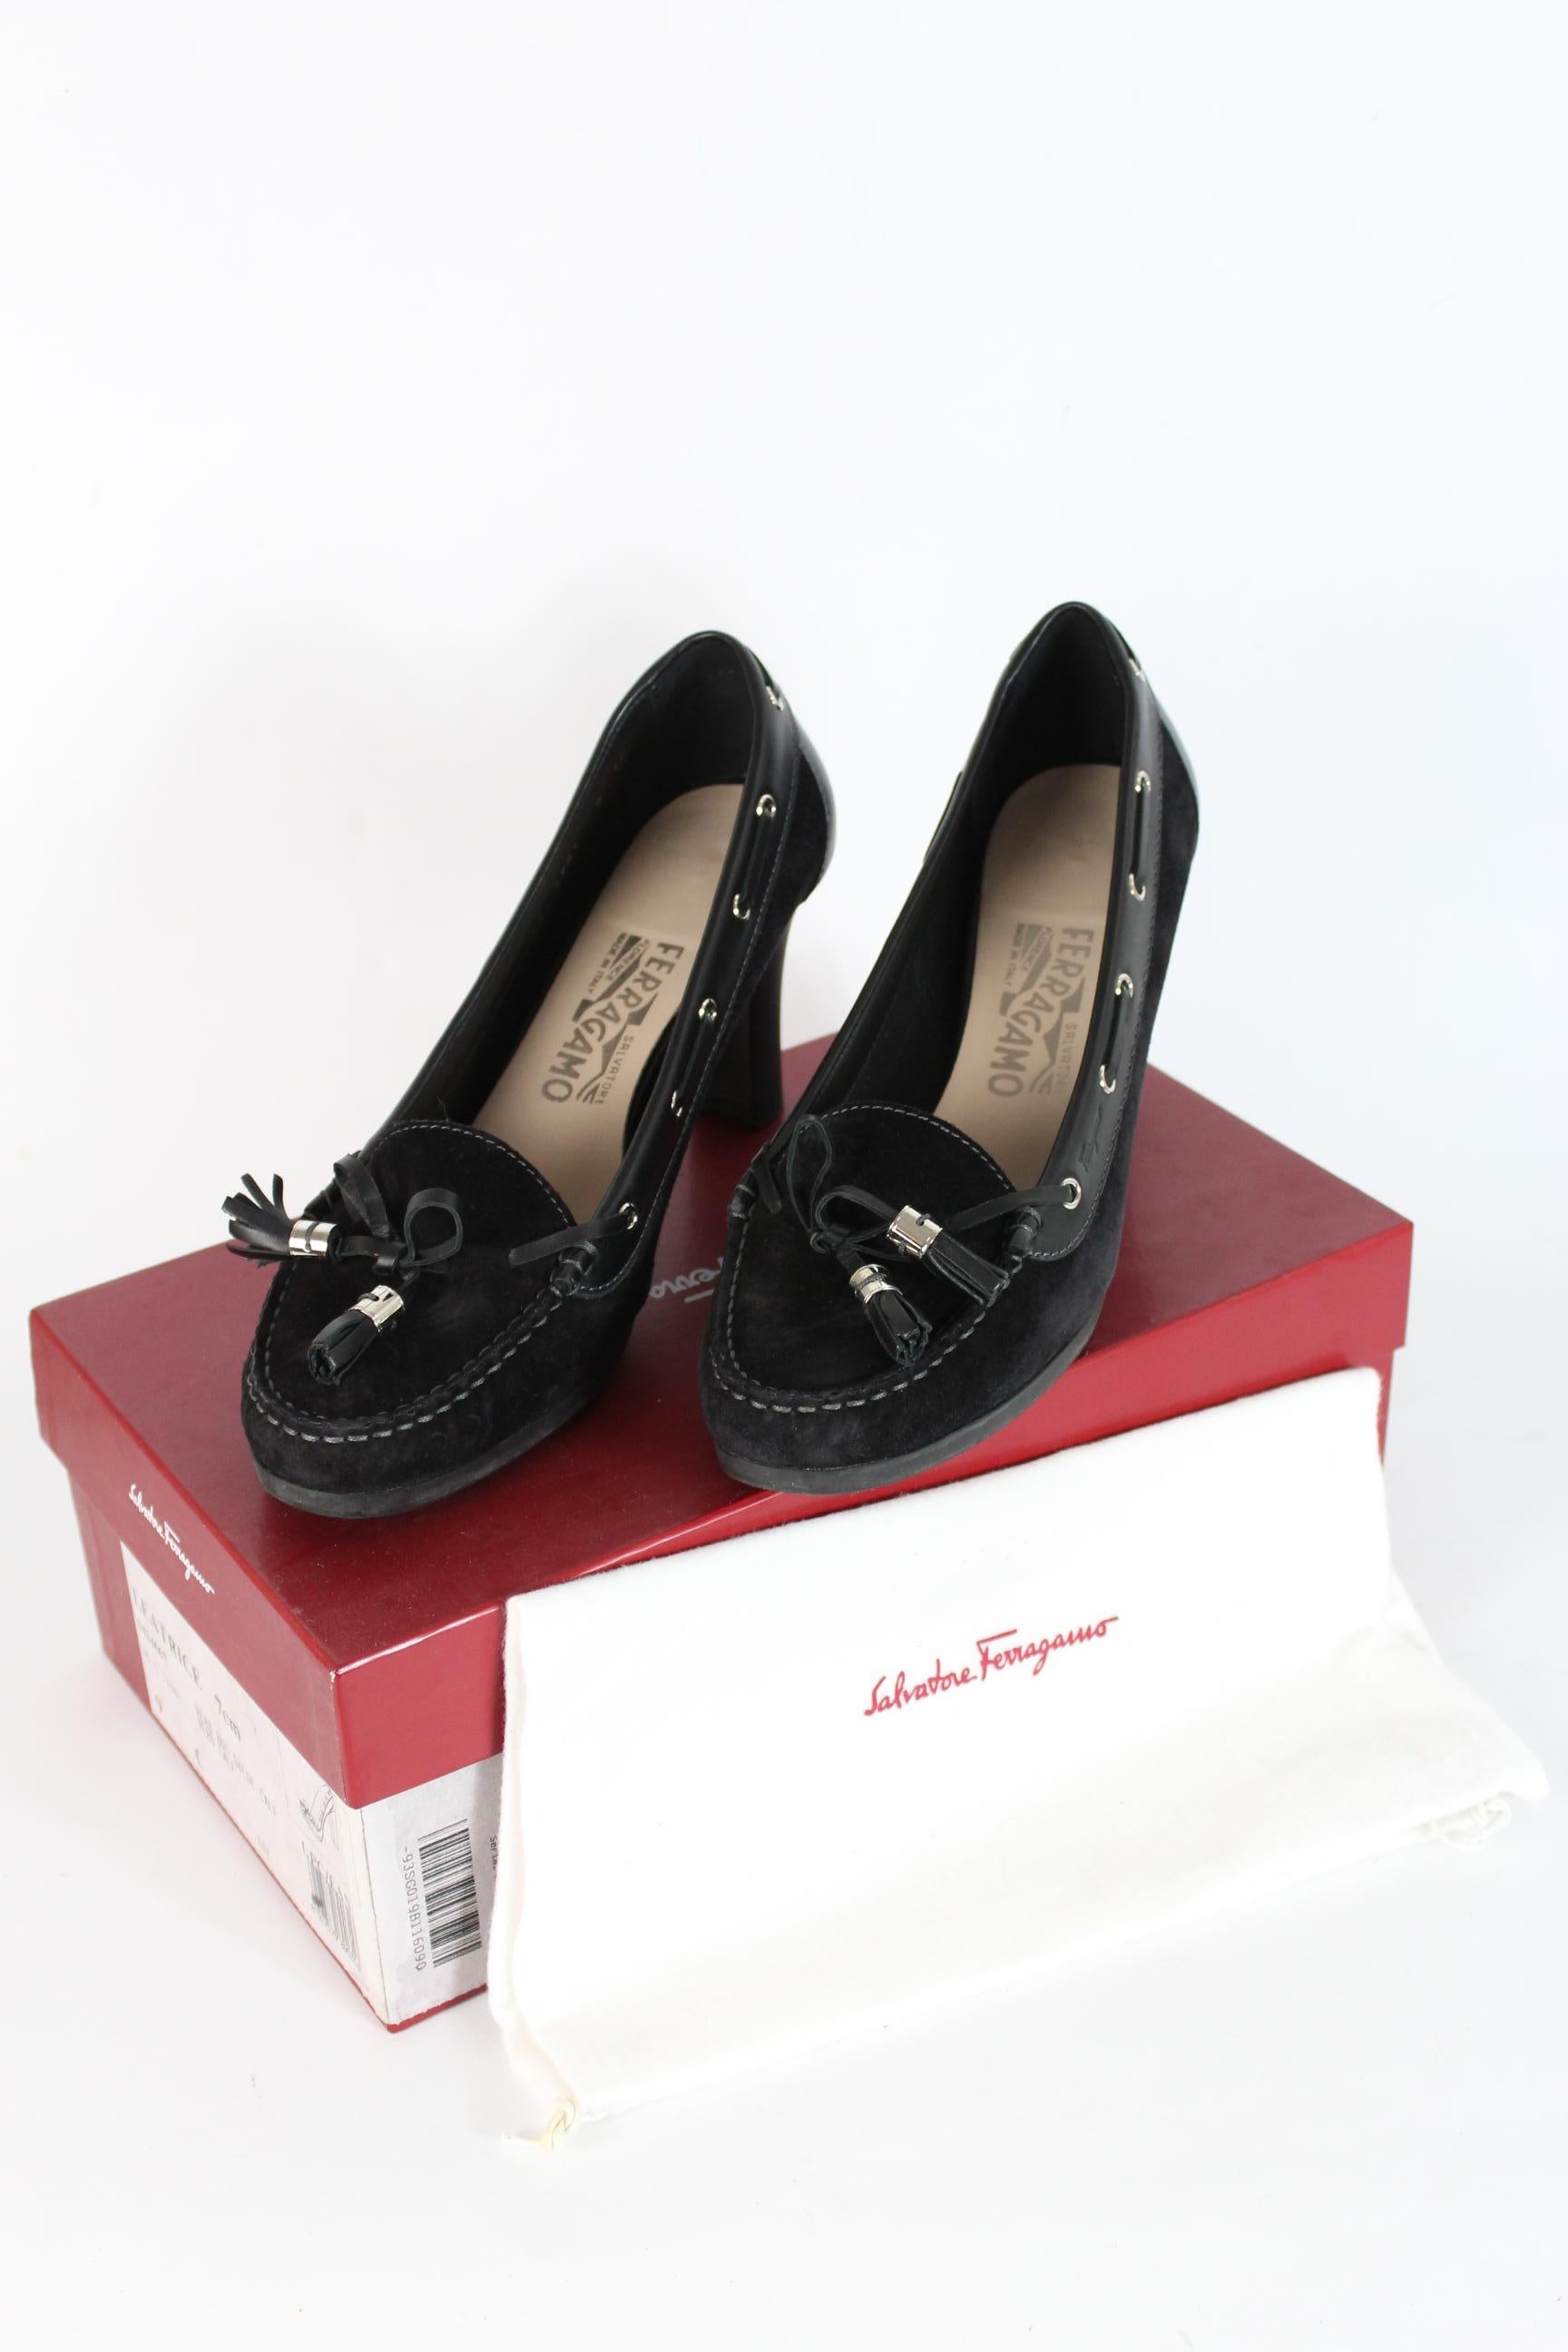 Salvatore Ferragamo Leatrice 2000s women's shoes. Decollete with heel , round toe. Color black in leather and suede. Made in Italy. New with box.

Code: SG198191C


Size: 40 It 9 Us 6.5 Uk


Heel height: 7 cm